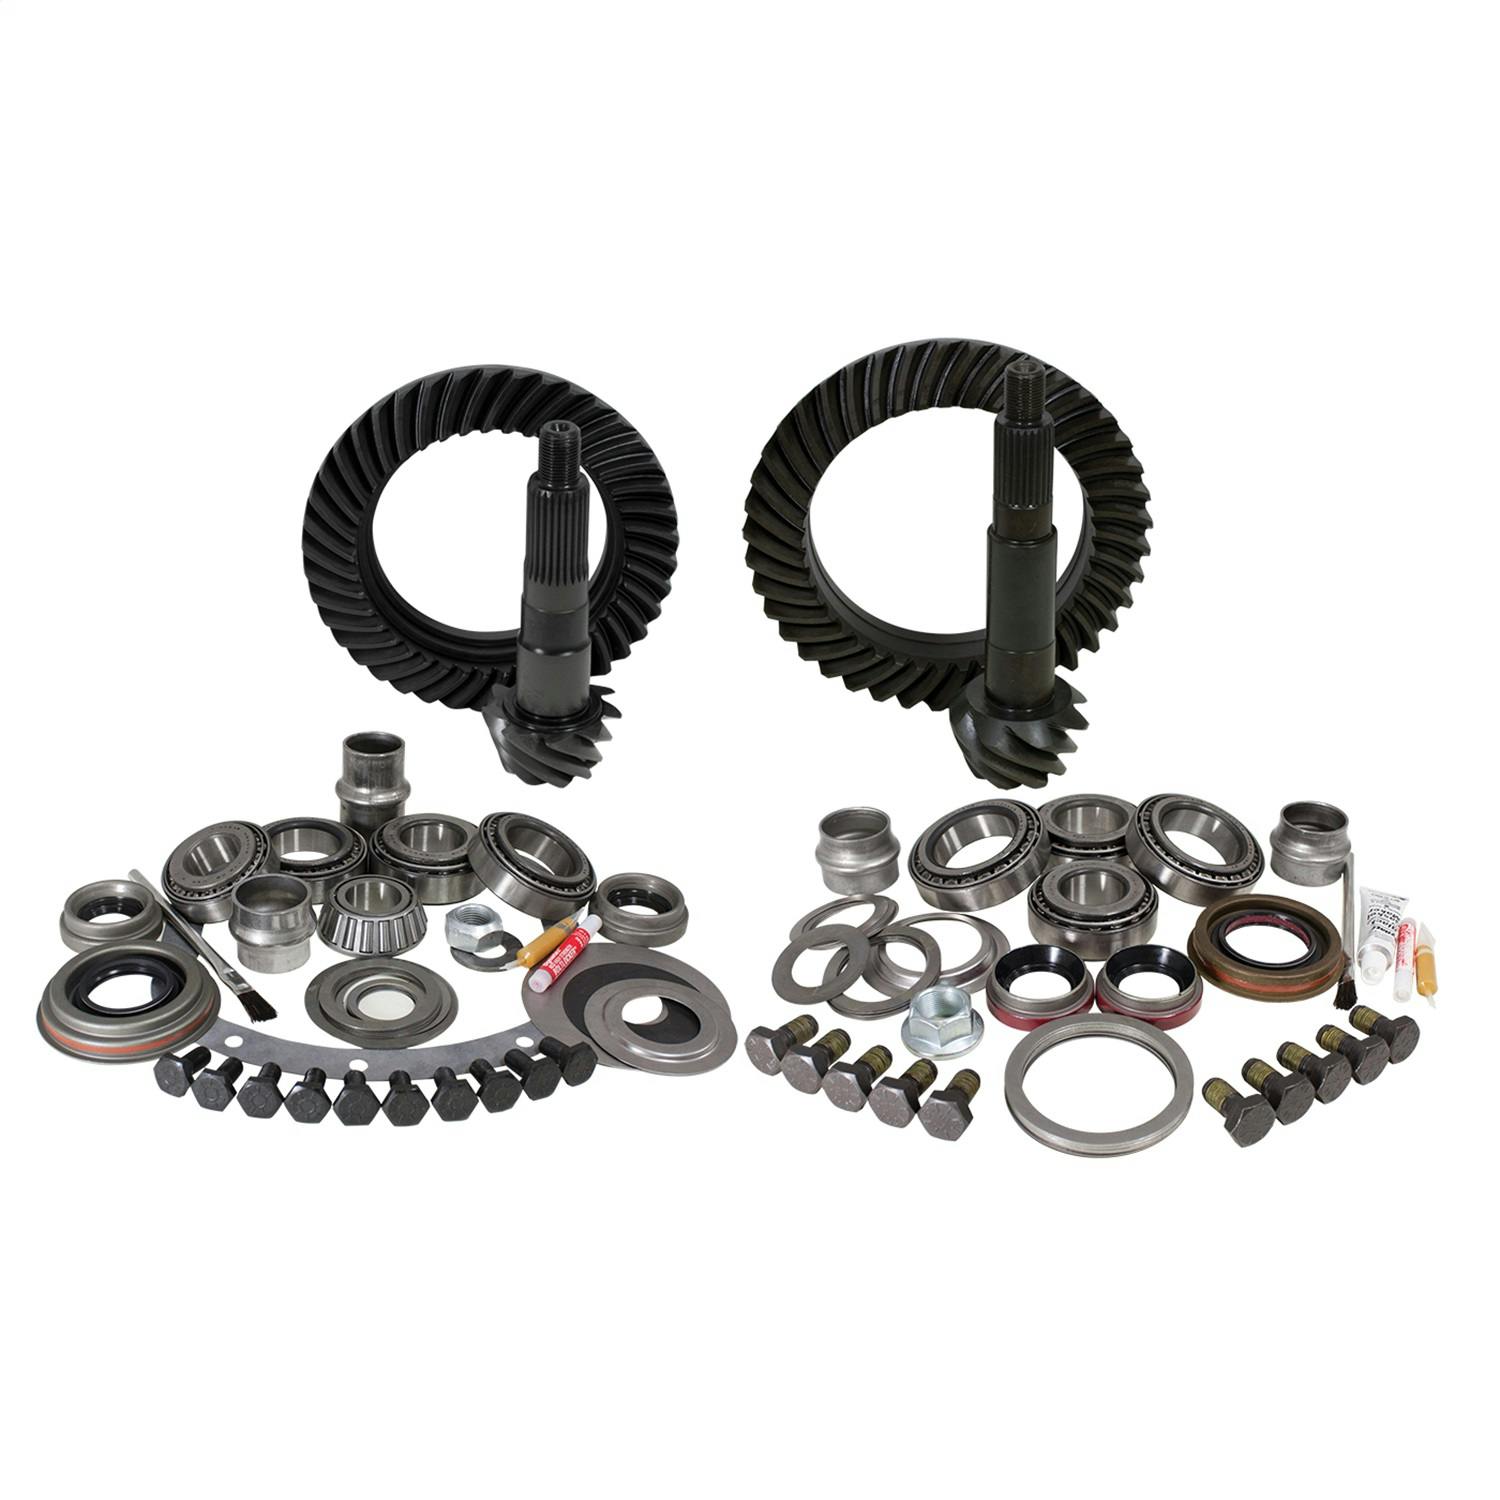 USA Standard Gear ZGK001 Ring And Pinion Set And Complete Install Kit